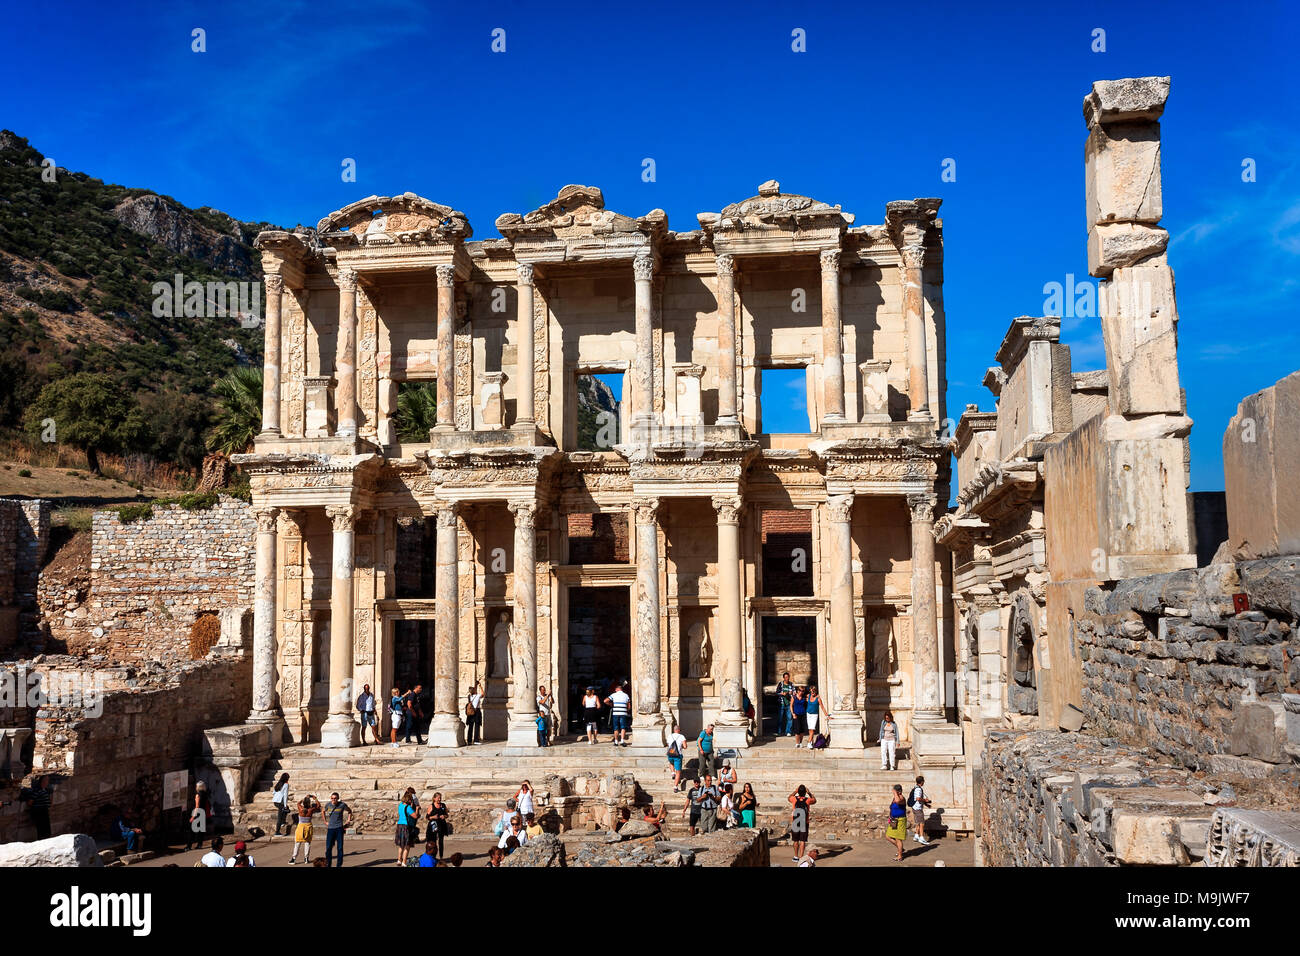 Ancient Library of Celsus walls in Efes, site full of tourists. Wide front view. EPHESUS, TURKEY - SEPTEMBER 30, 2014 Stock Photo